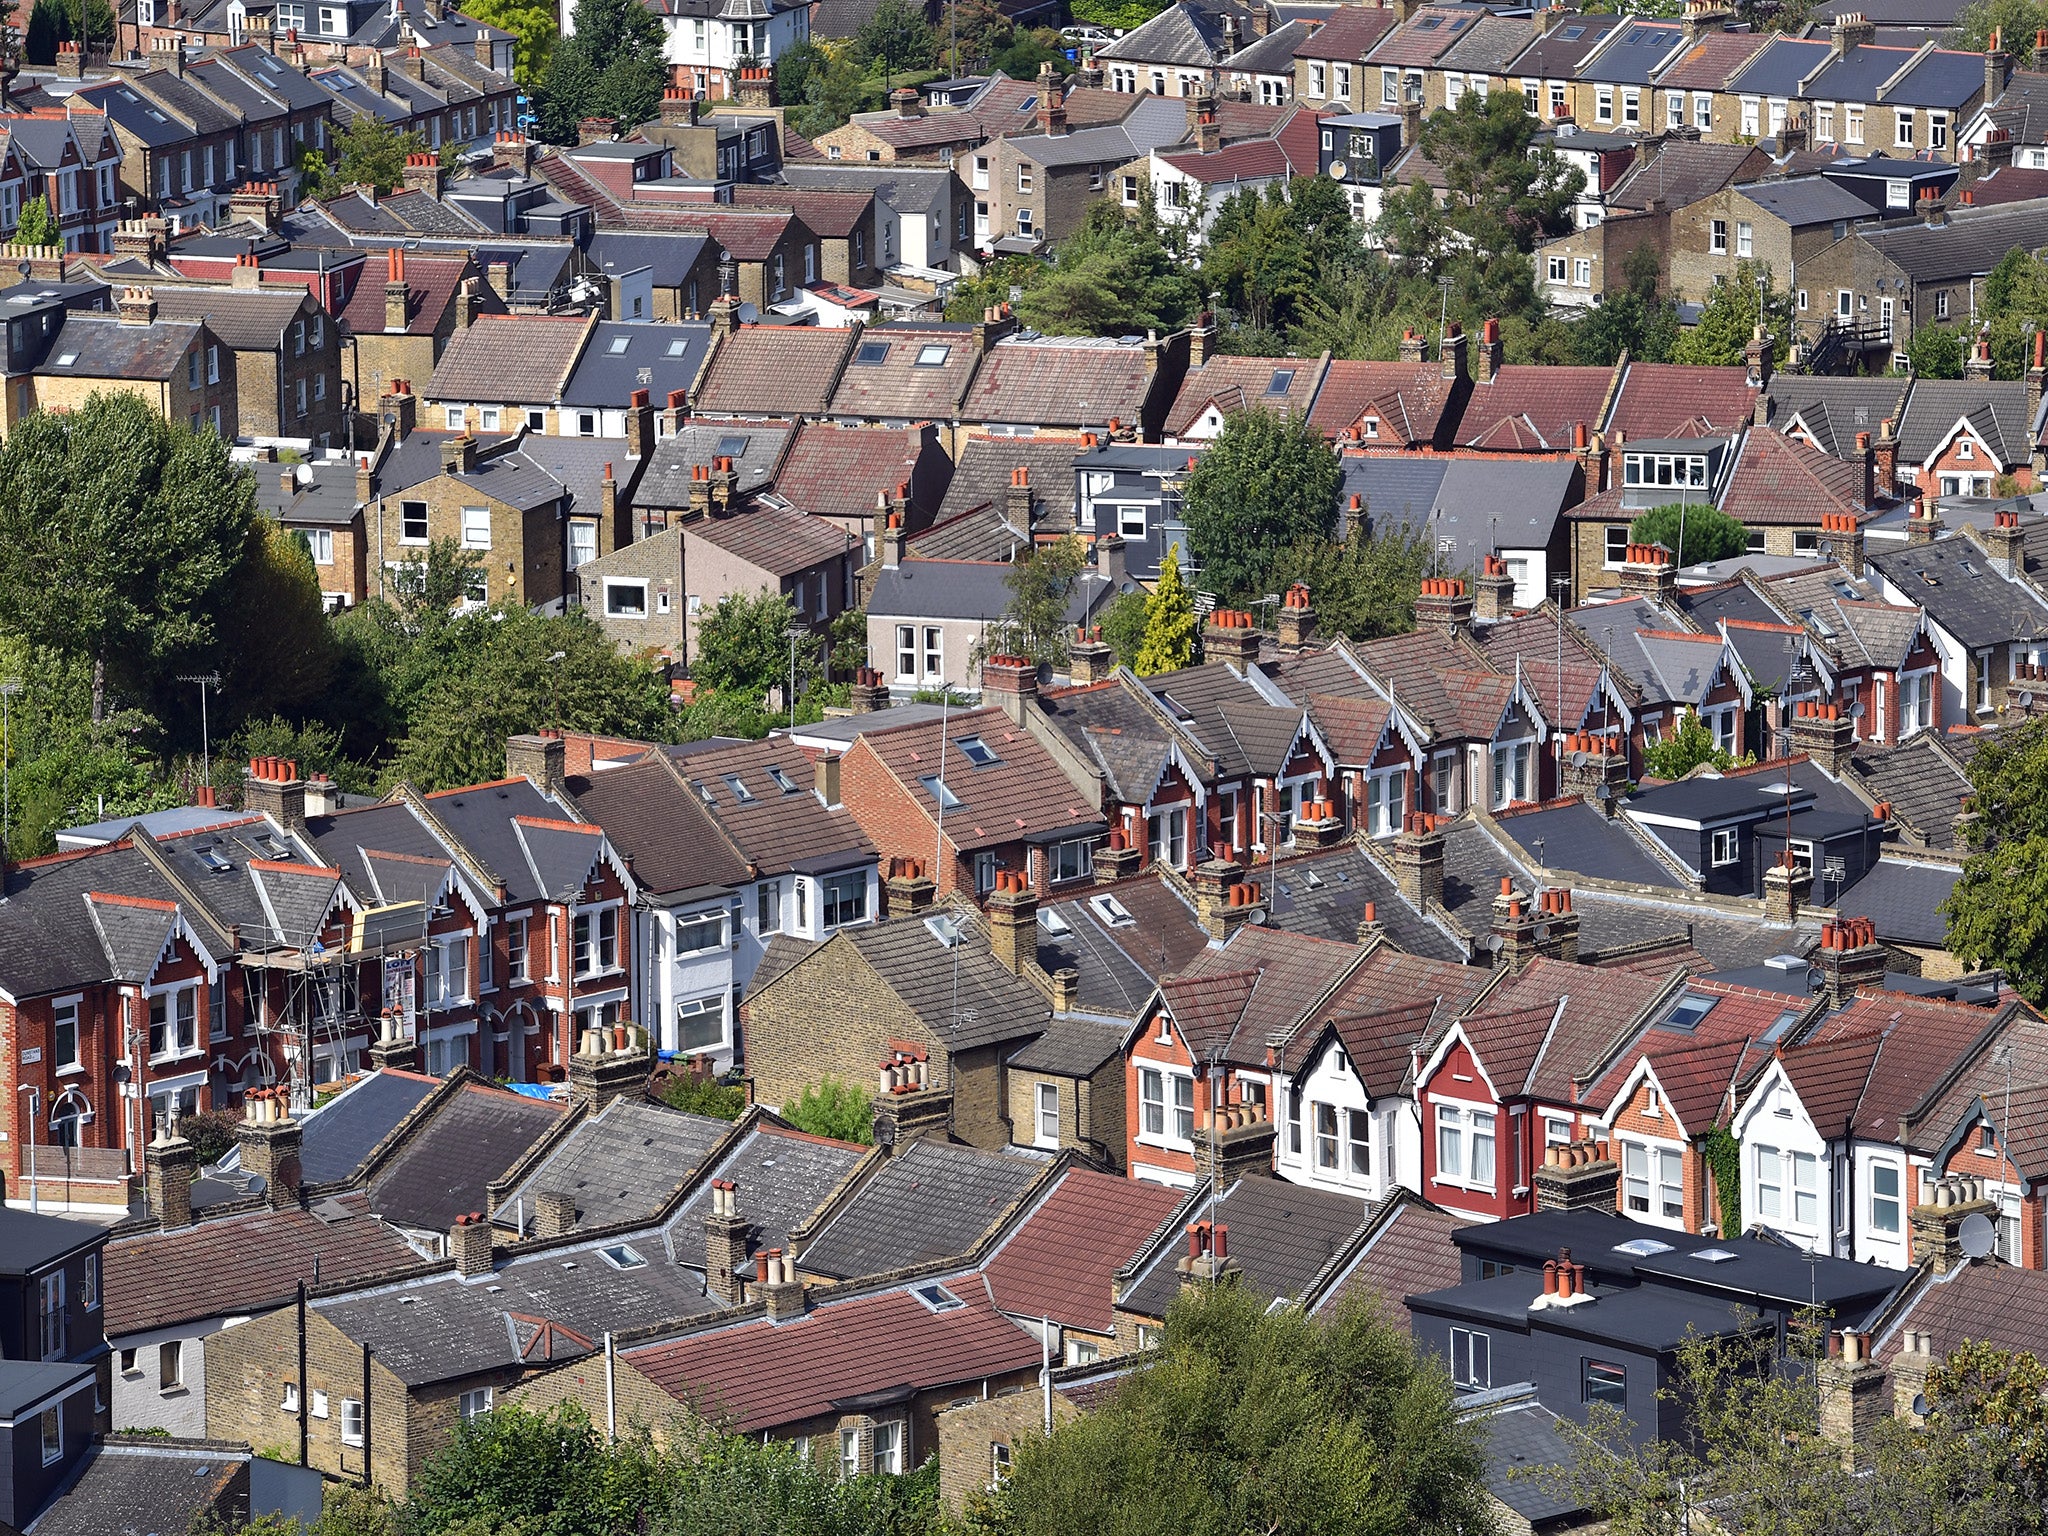 The analysis of house prices is not complete until we assess the insecurity that renters feel